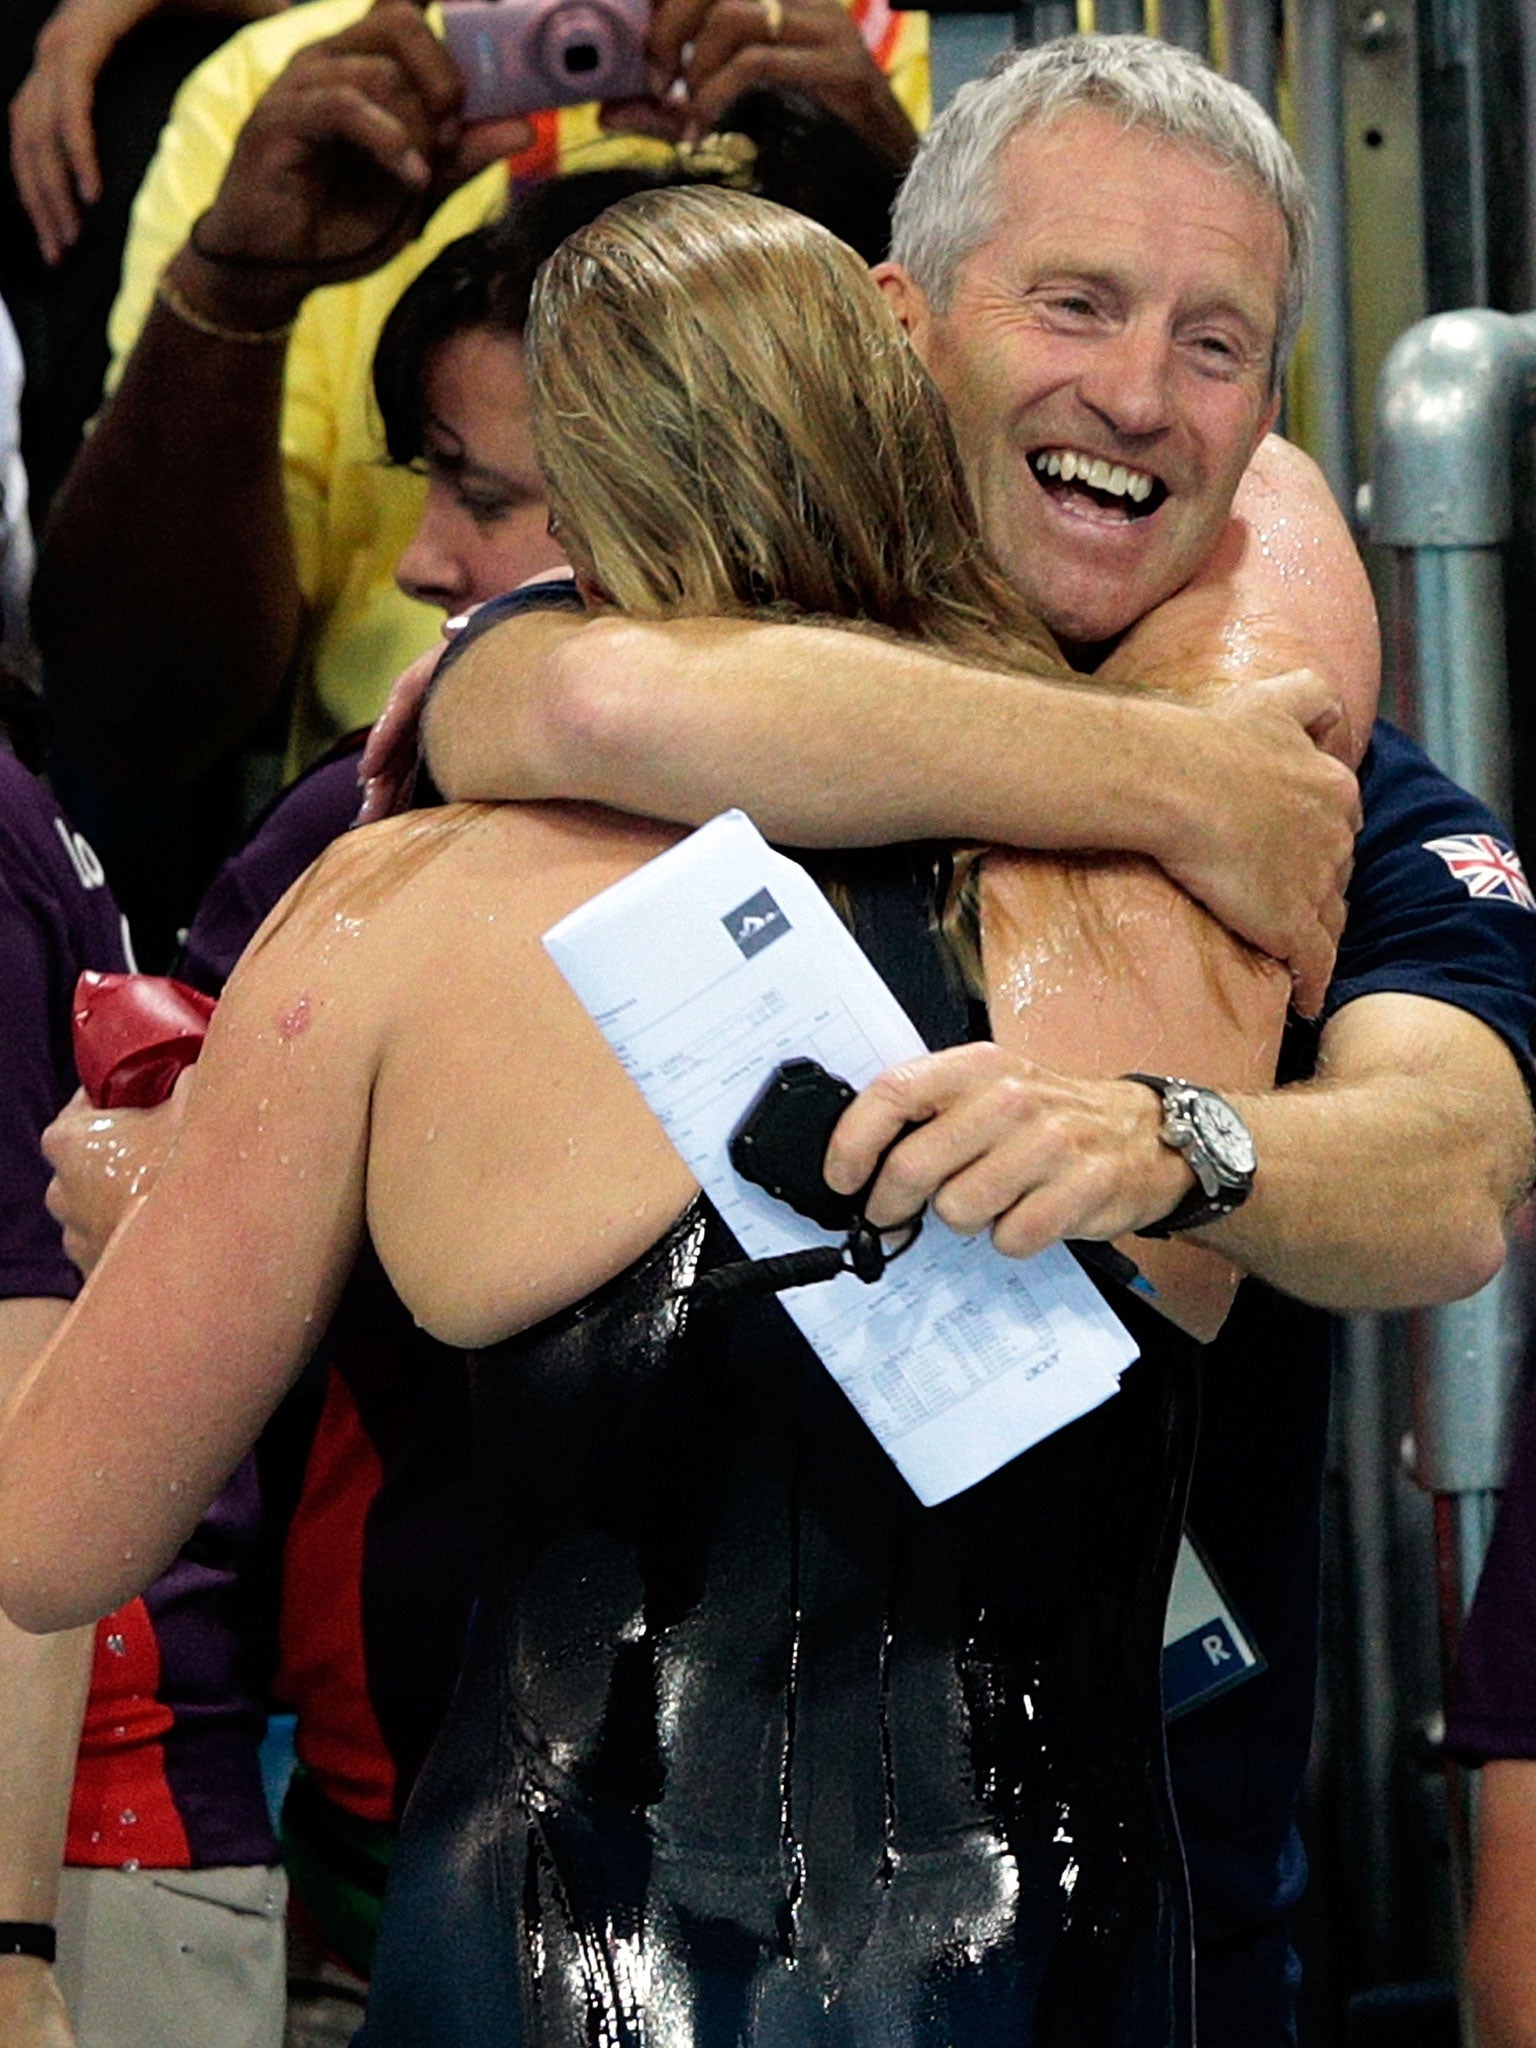 Coach Bill Furniss shares Rebecca Adlington’s joy after she won a bronze medal in the 400m freestyle at the London Olympics